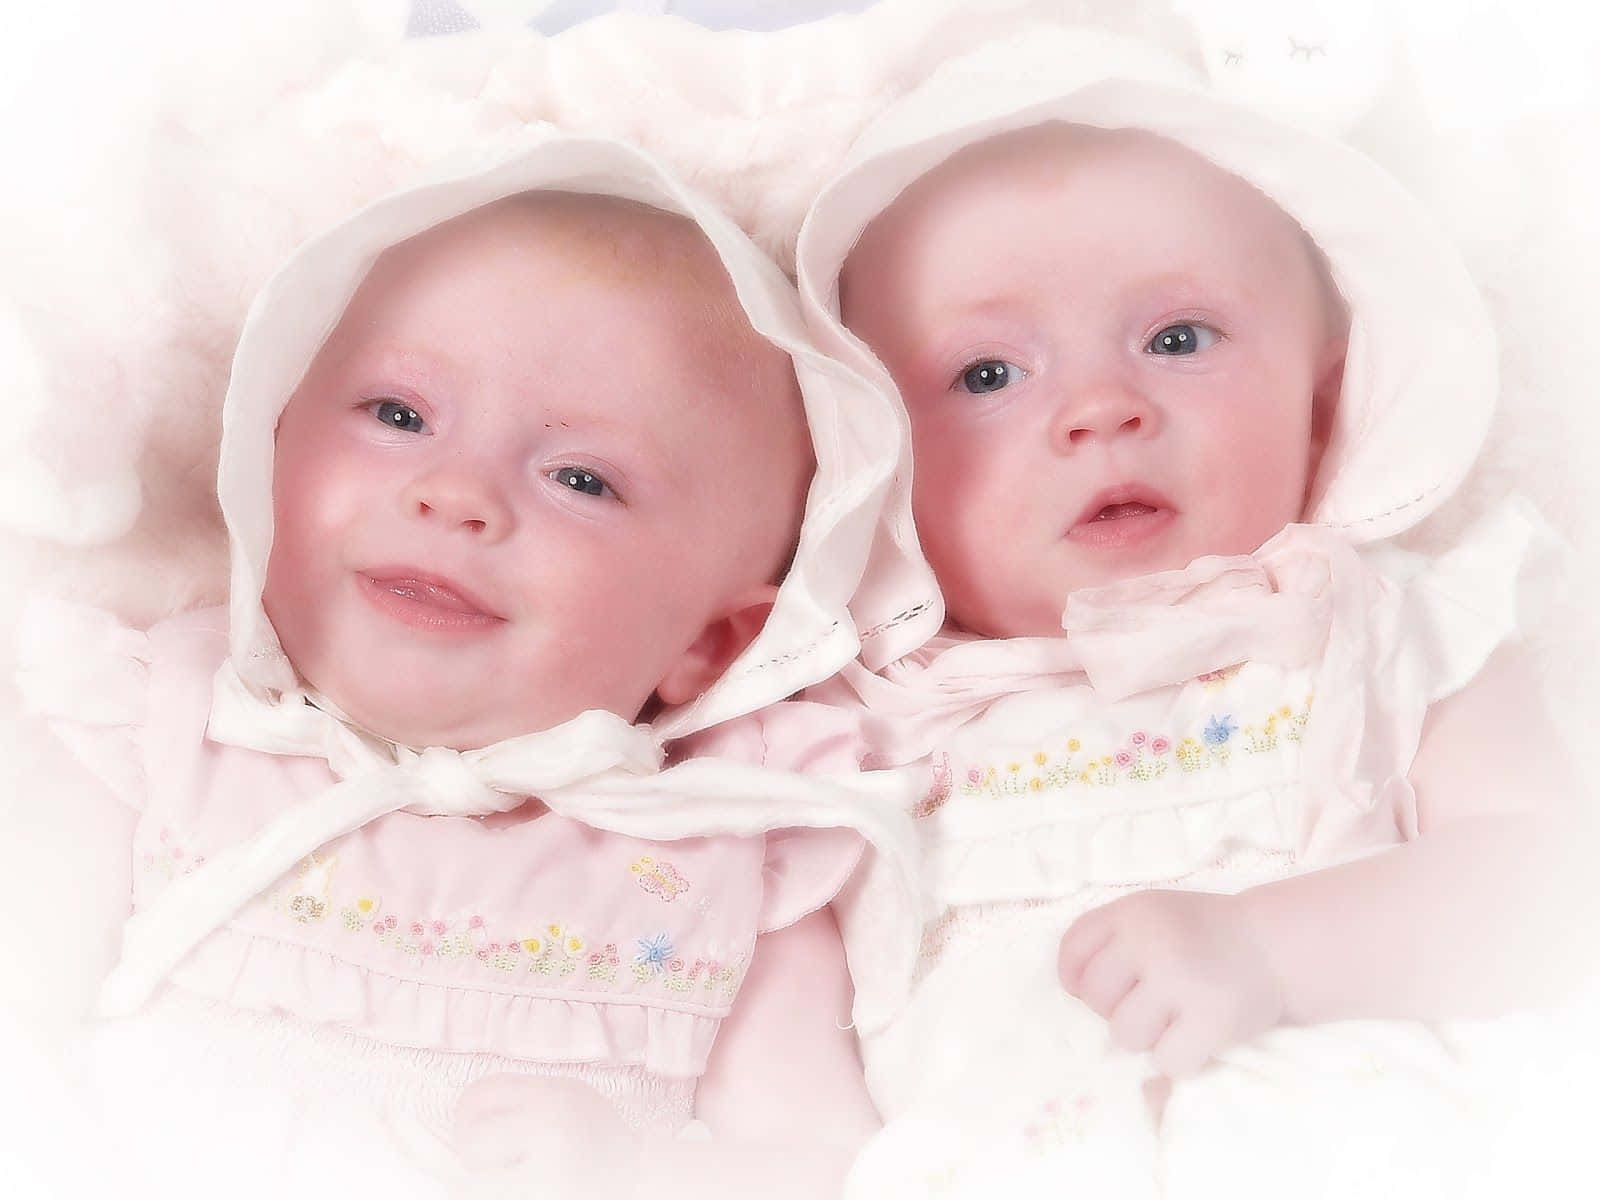 Adorable Twin Babies in Bunny Hats